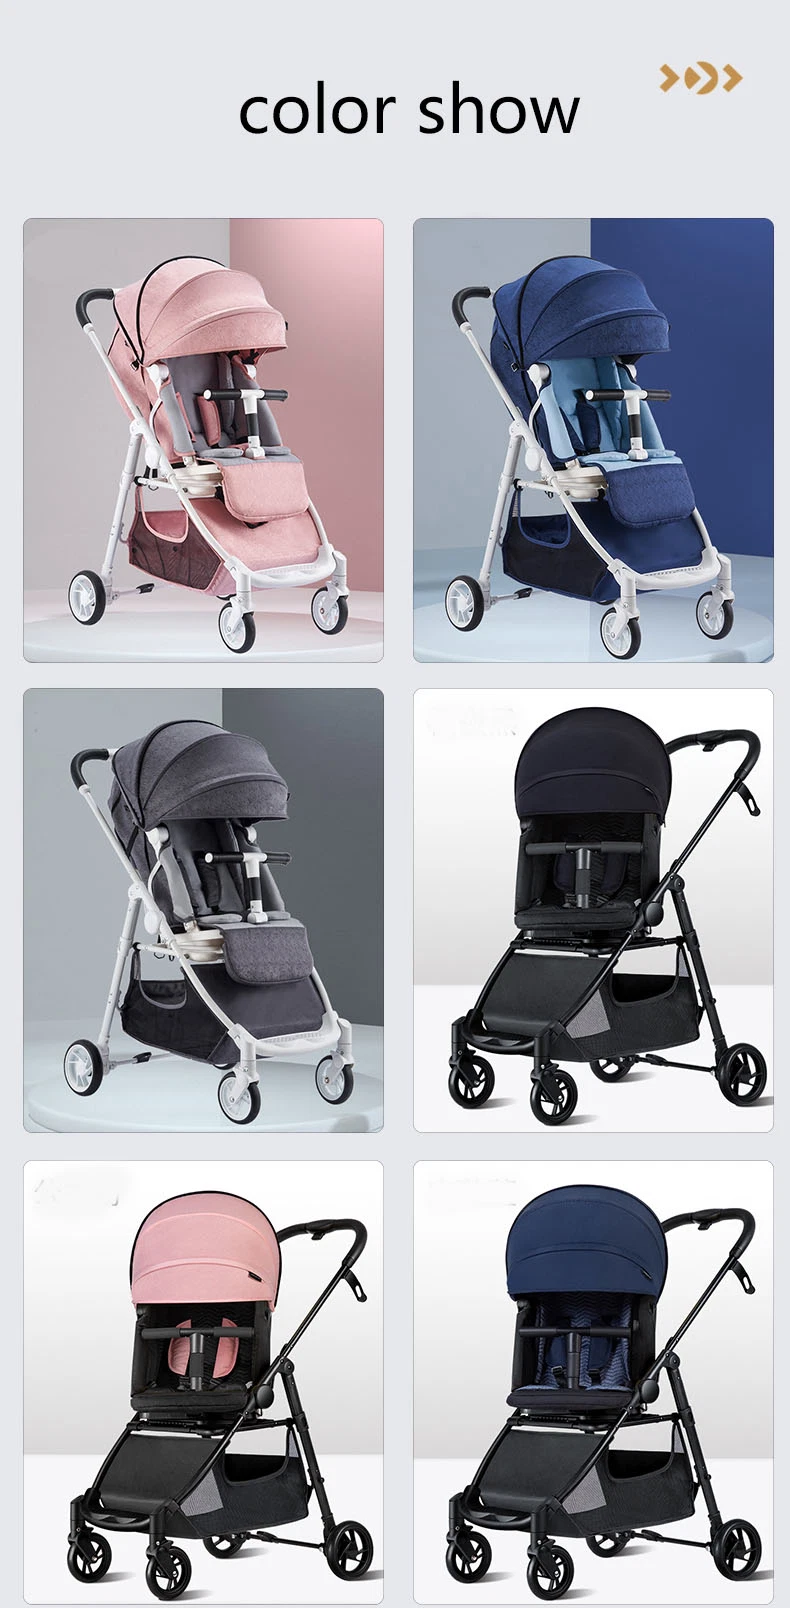 Hot Aluminium Alloy Fabric Manufacture Baby Stroller Foldable Compact Toddler Travel Stroller